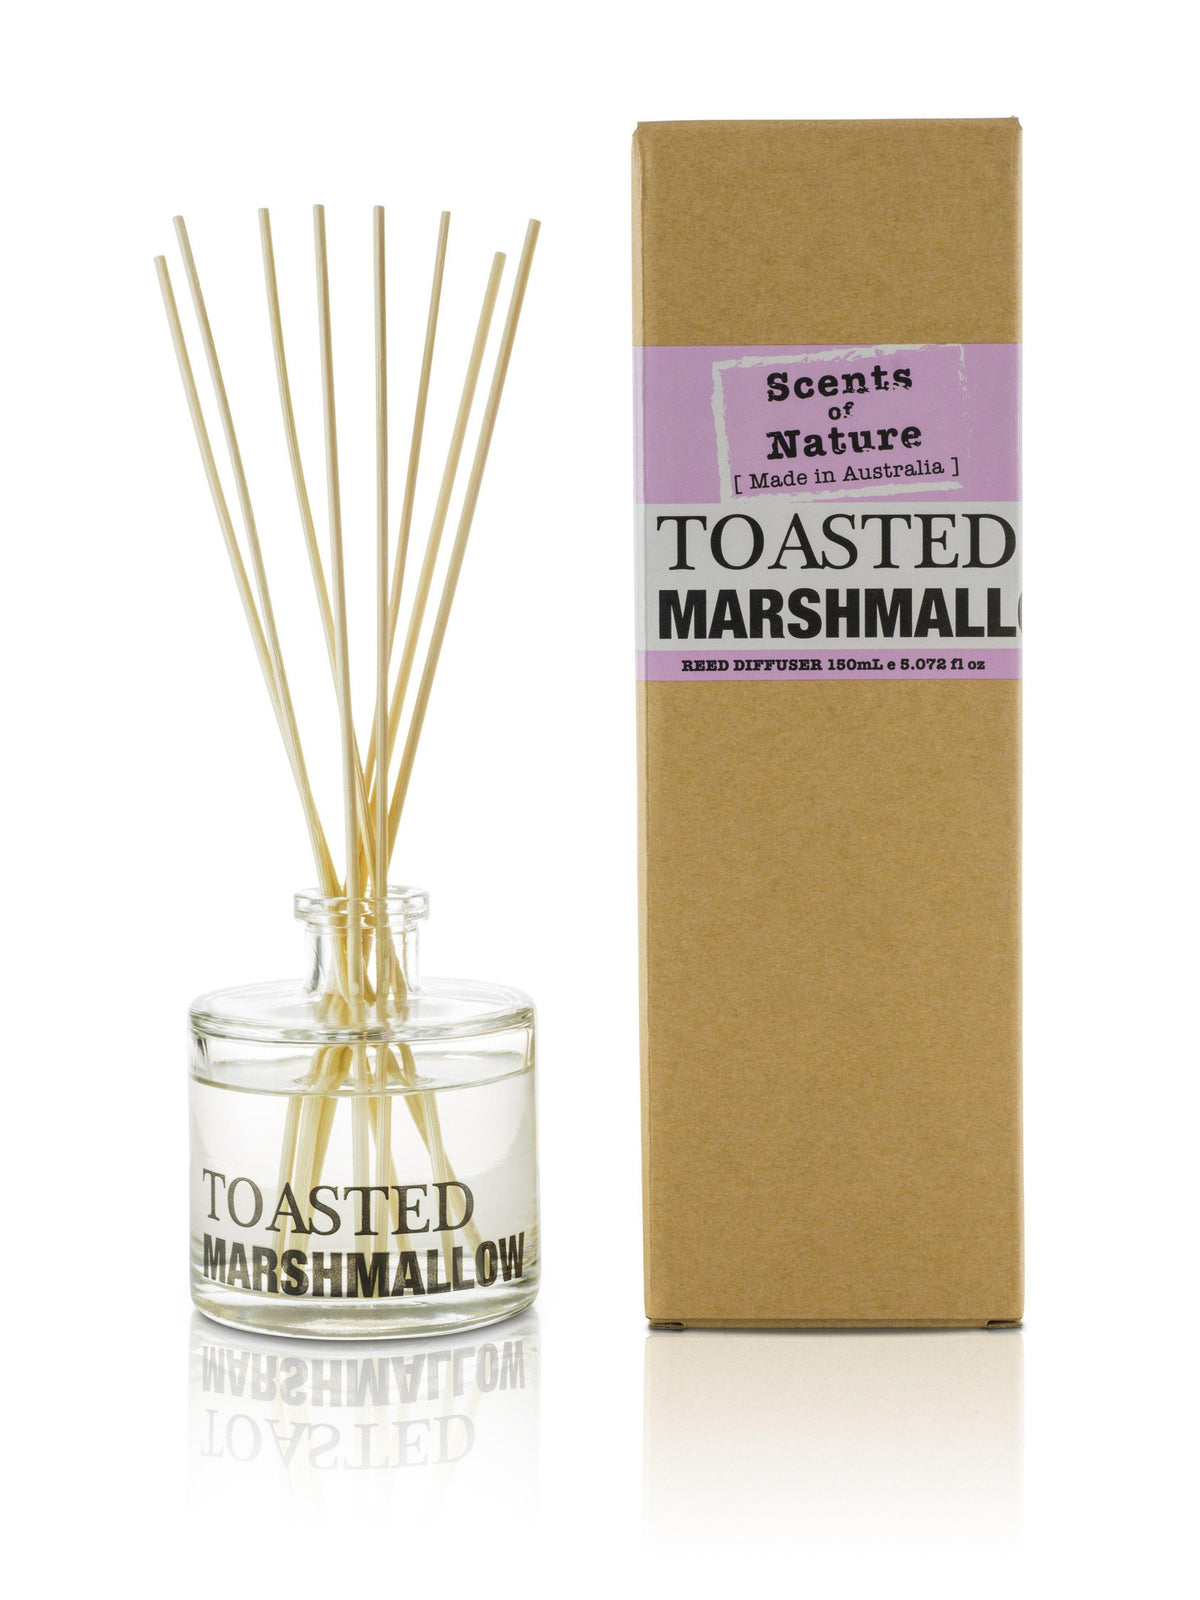 Scents of Nature by Tilley Reed Diffuser (150ml) - Toasted Marshmallow